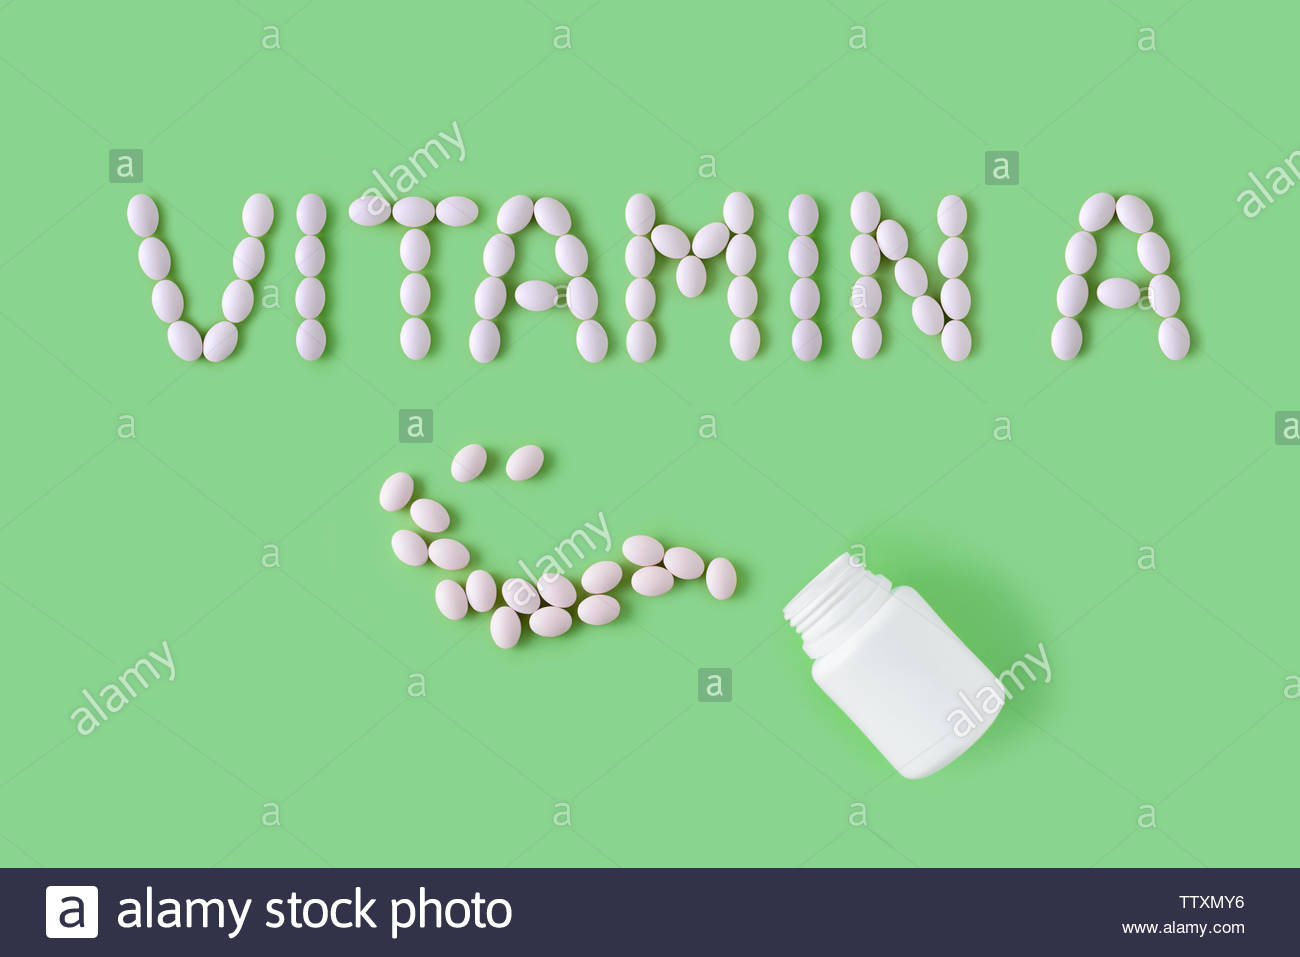 Pills Dropped In Shape Of Words Vitamin A From Bottle On Green